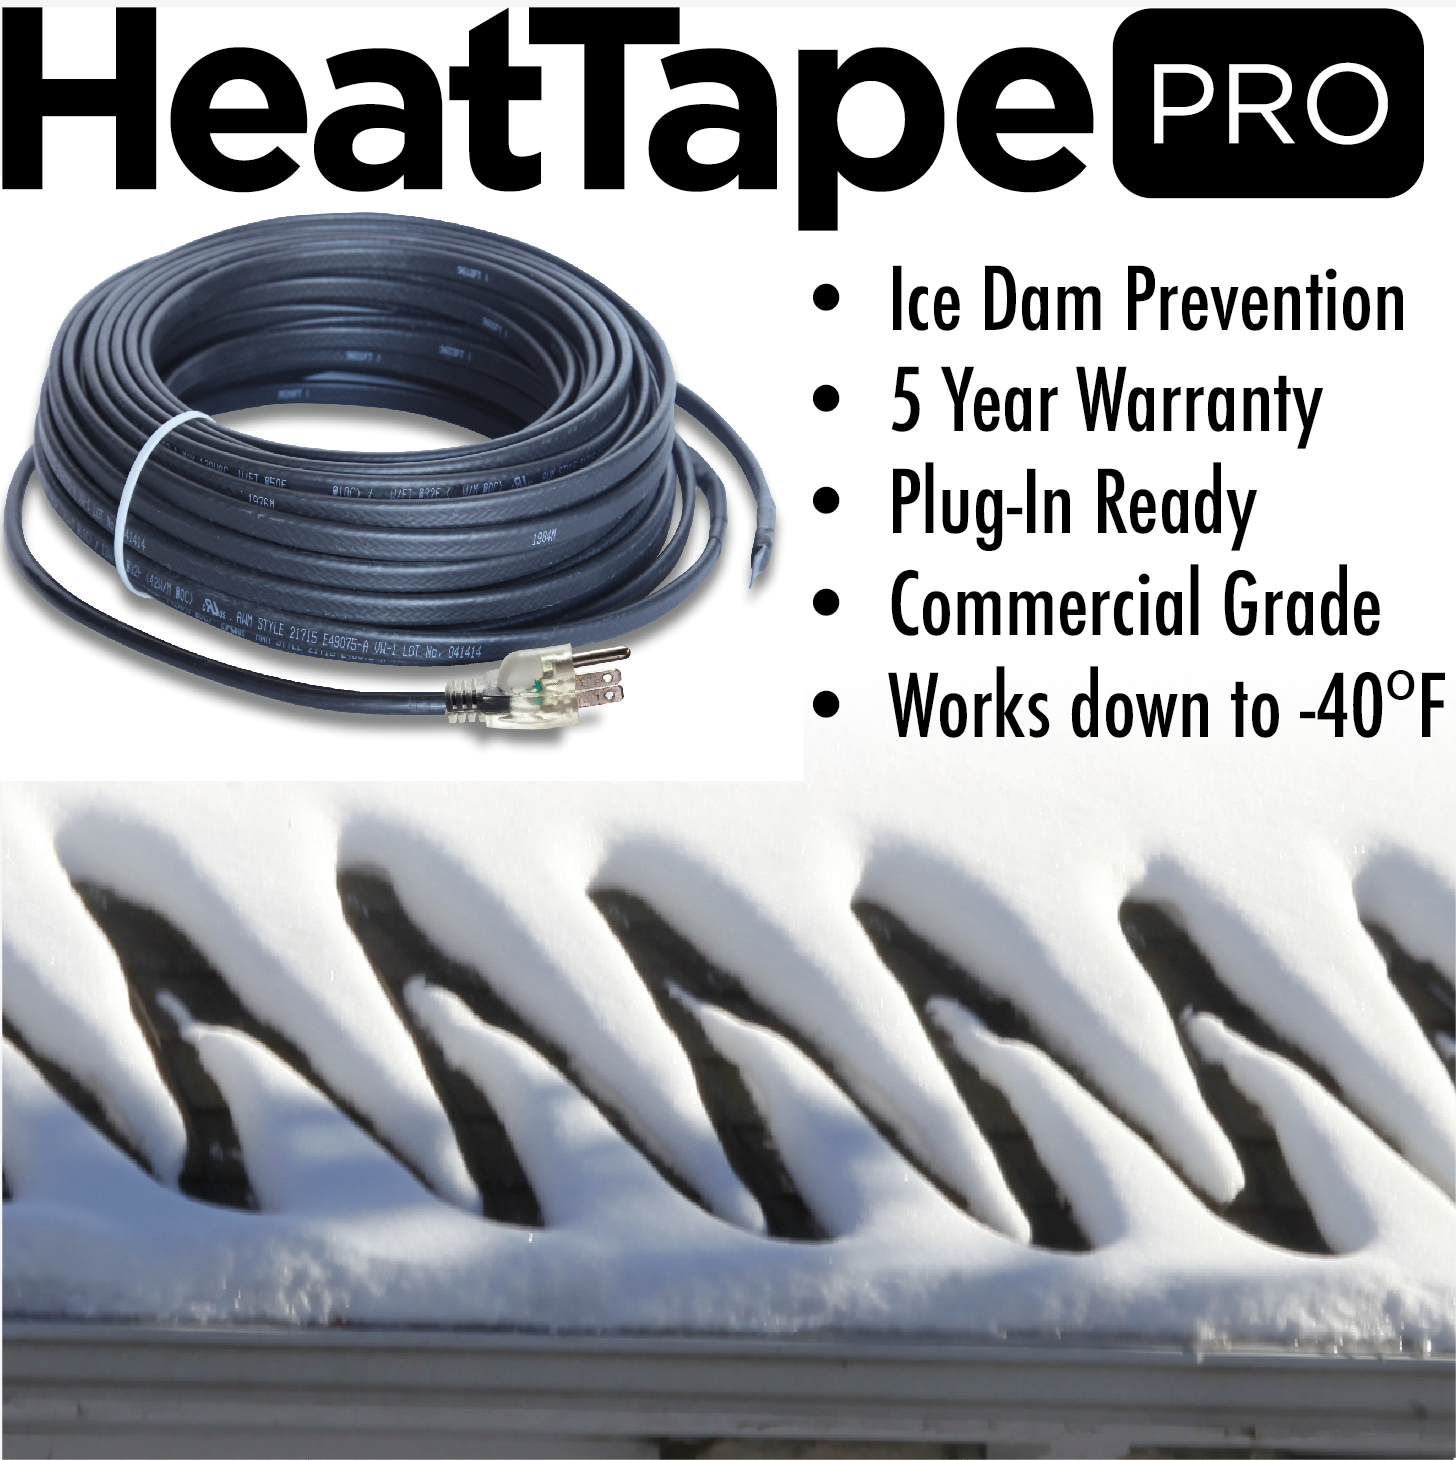 Heat Cable for Ice Dams